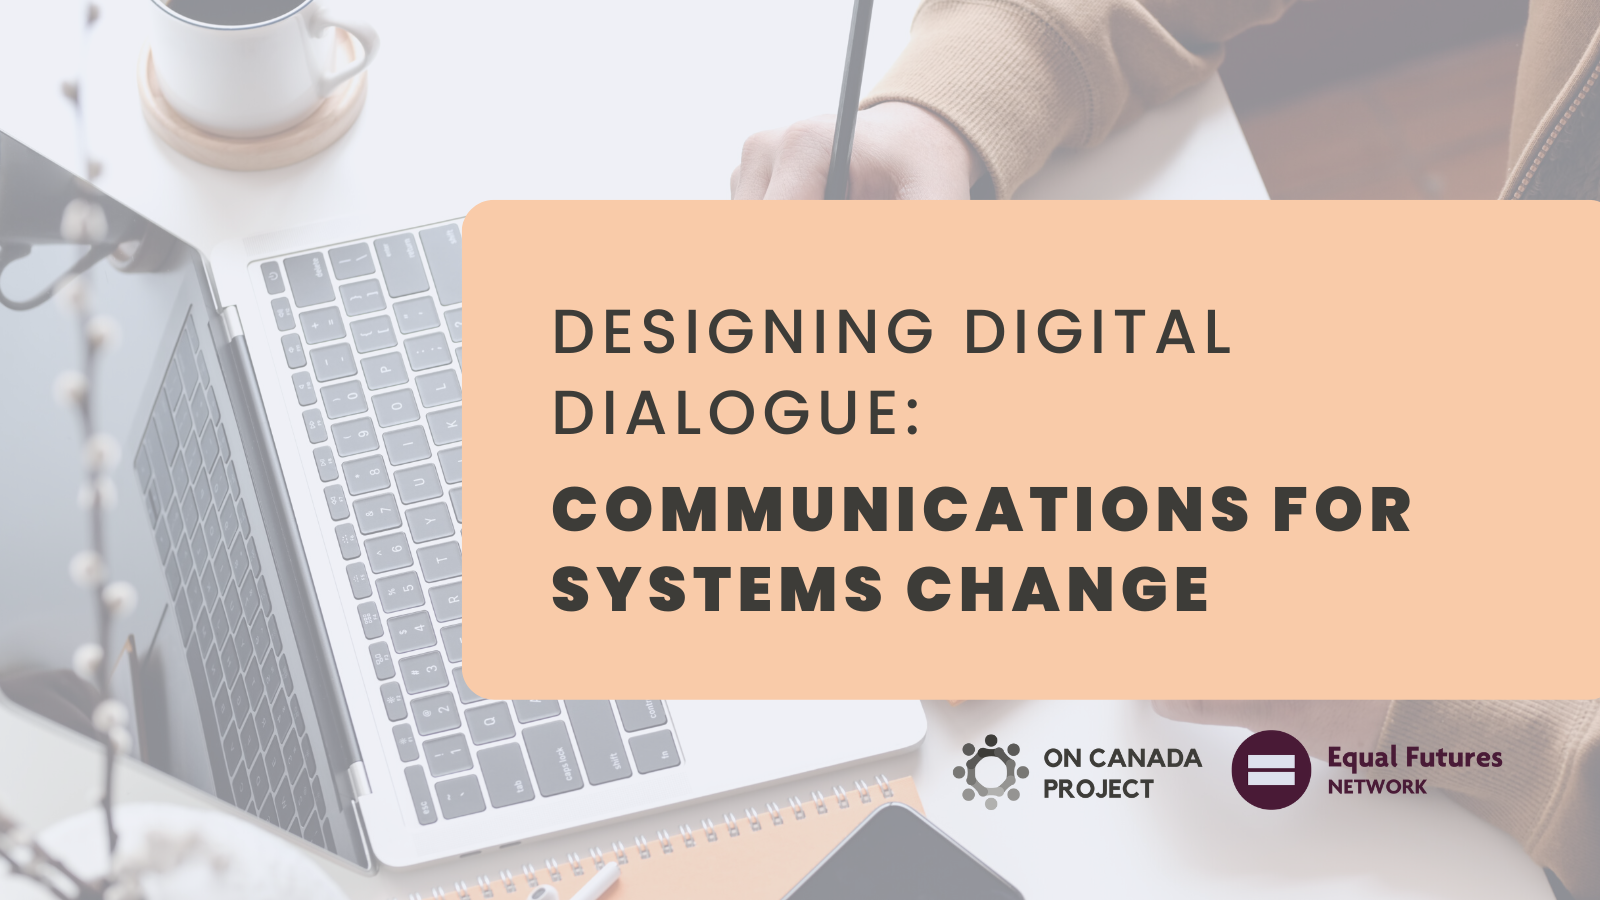 Introducing Designing Digital Dialogue: Communications for Systems Change